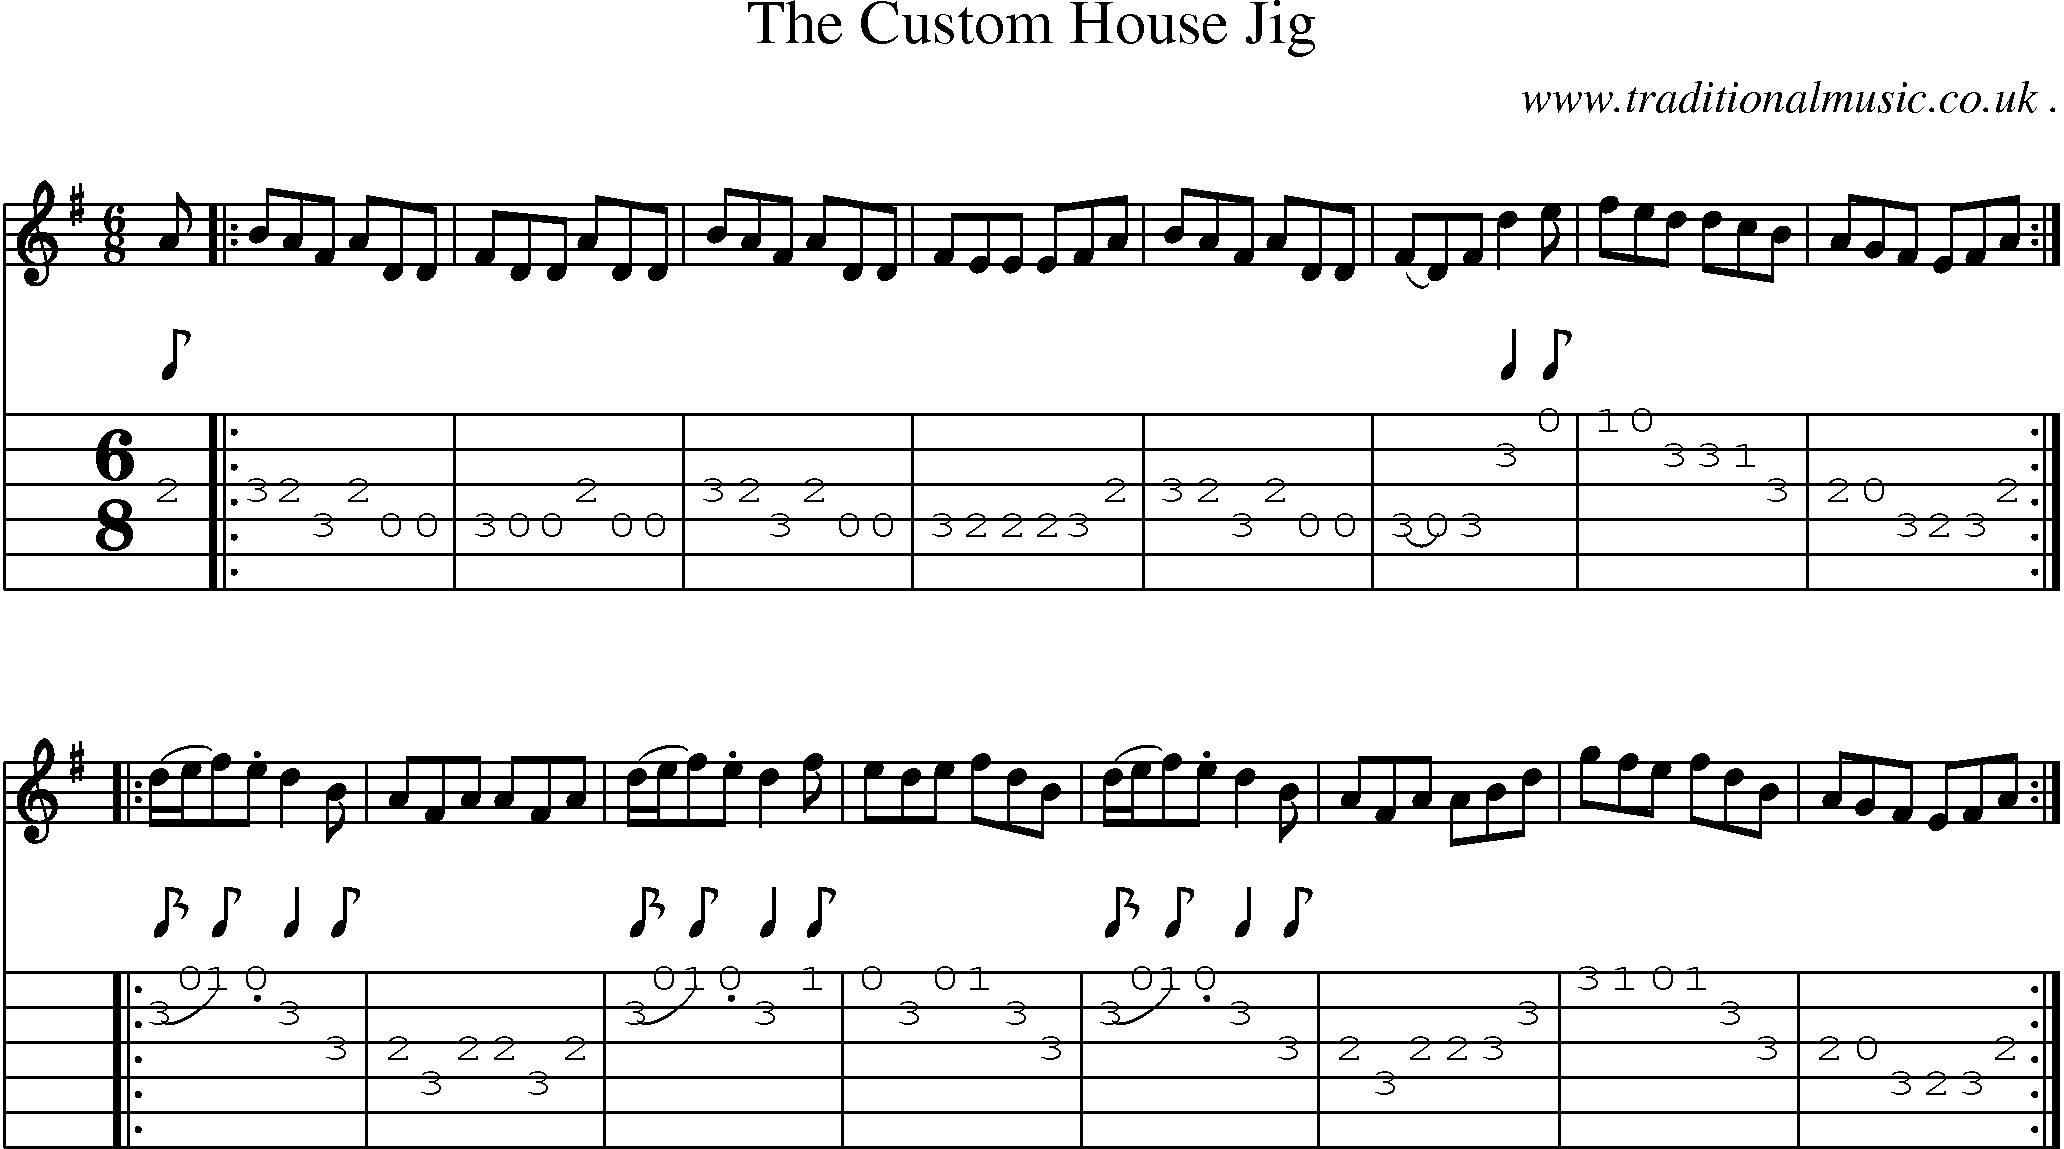 Sheet-Music and Guitar Tabs for The Custom House Jig